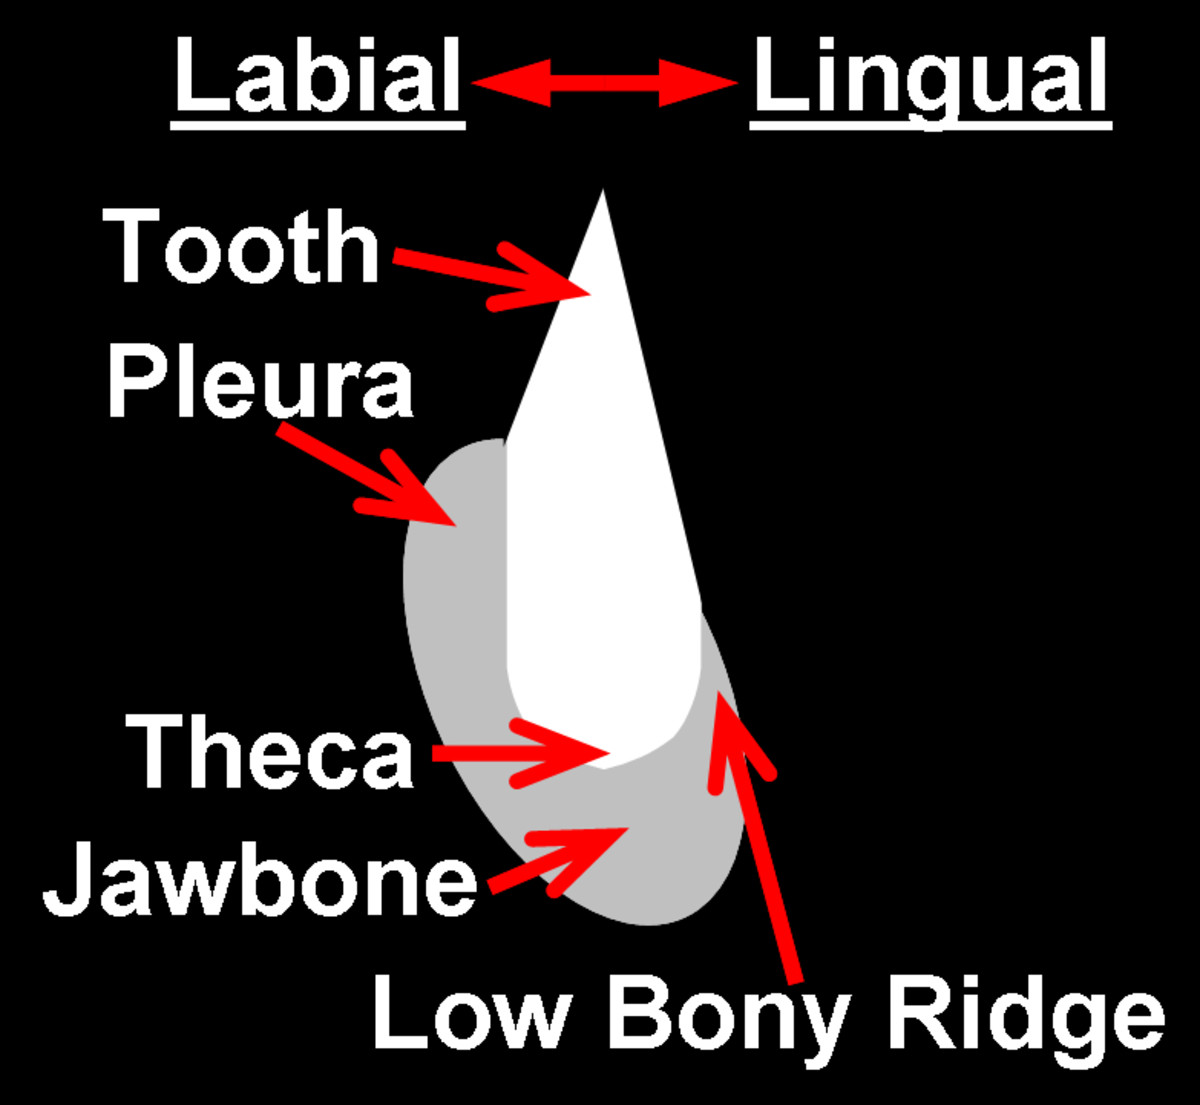 Snakes have subpleurodont dentition, where the teeth reside in a theca (small pocket) bordered on the labial side by a large bony ridge (pleura) and bordered on the lingual side by a small bony ridge.